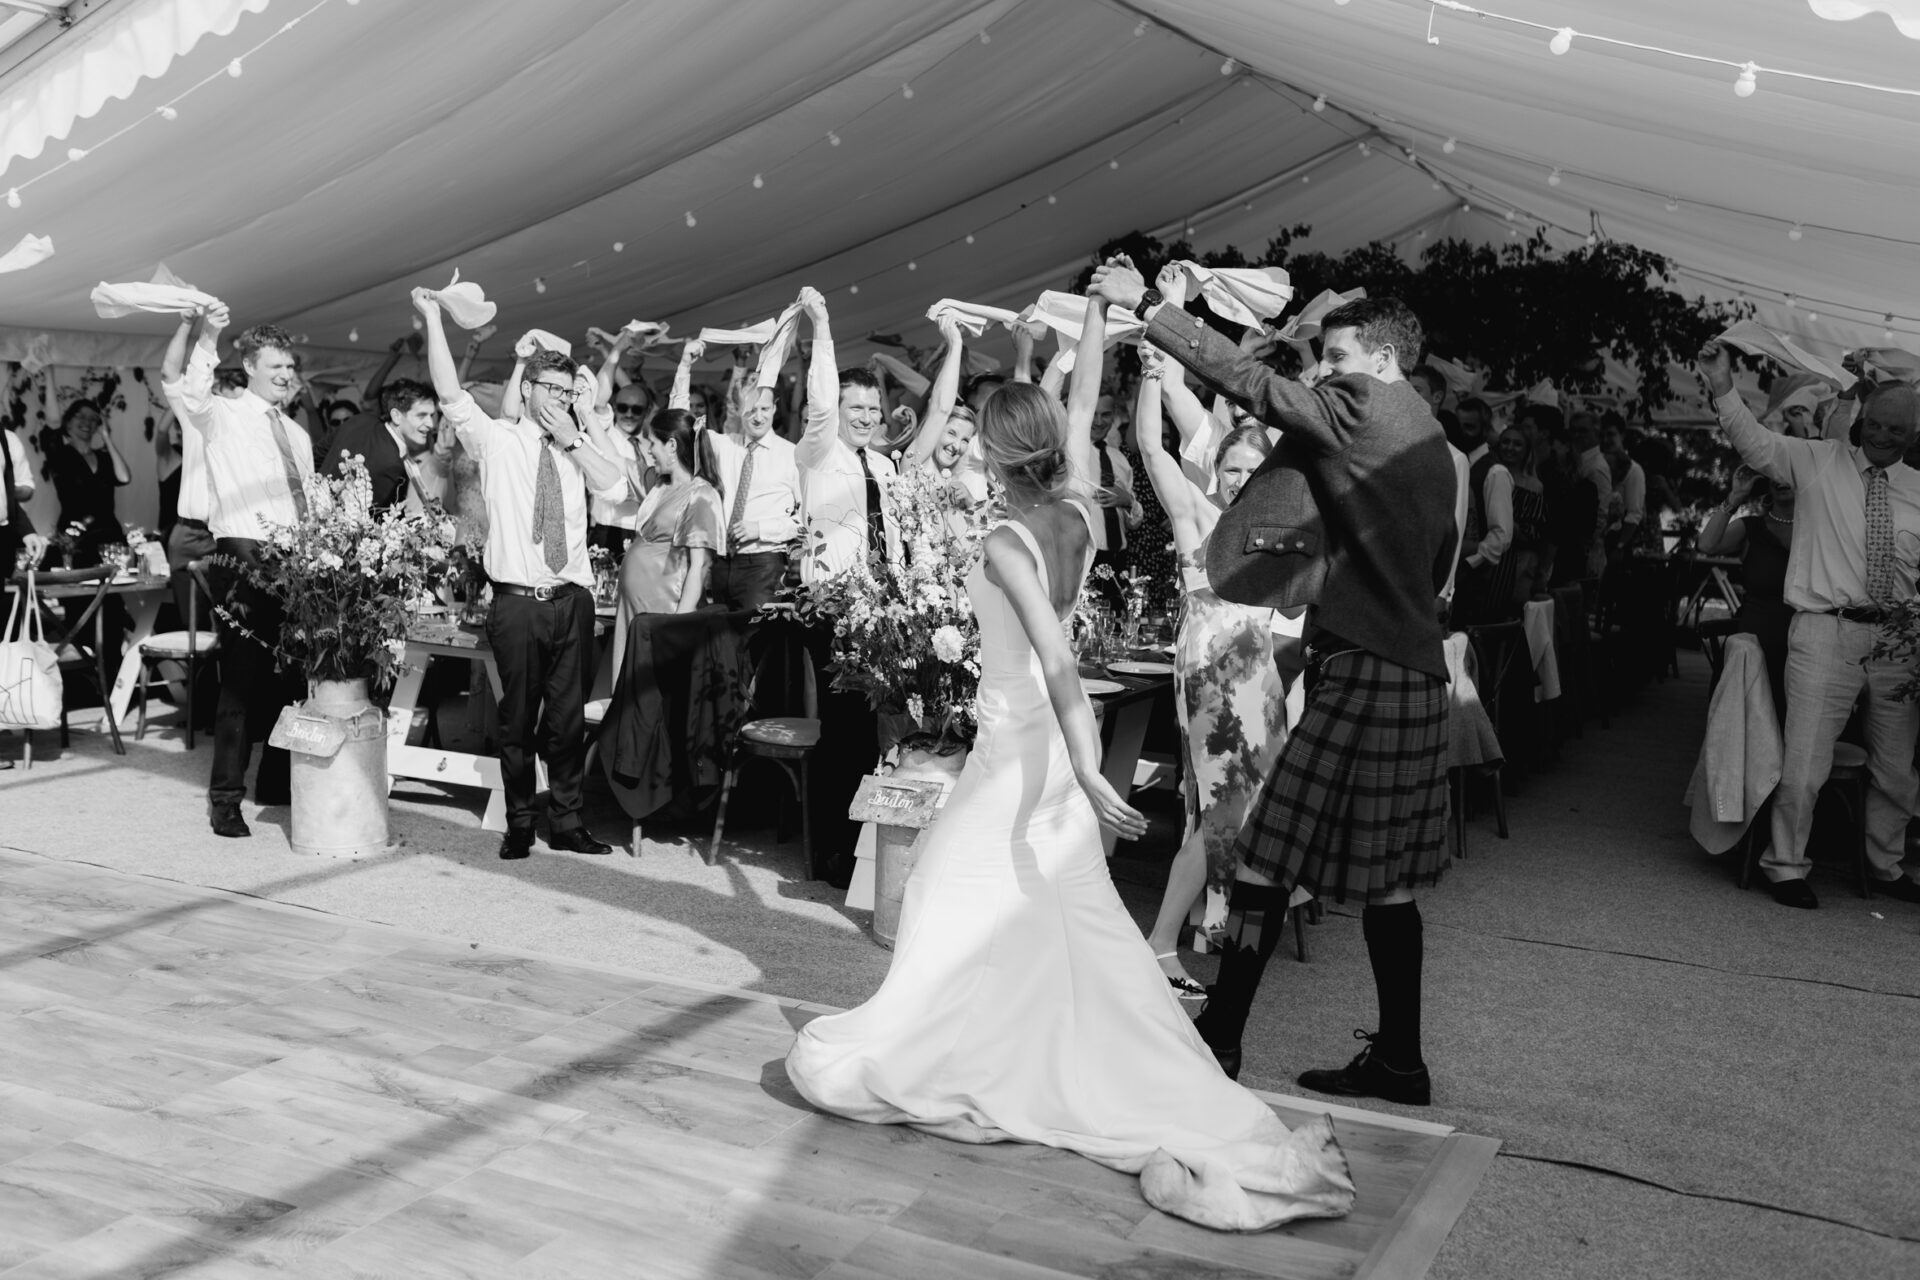 The bride and groom arrive to cheers from the guests for the wedding breakfast at their Devon marquee wedding